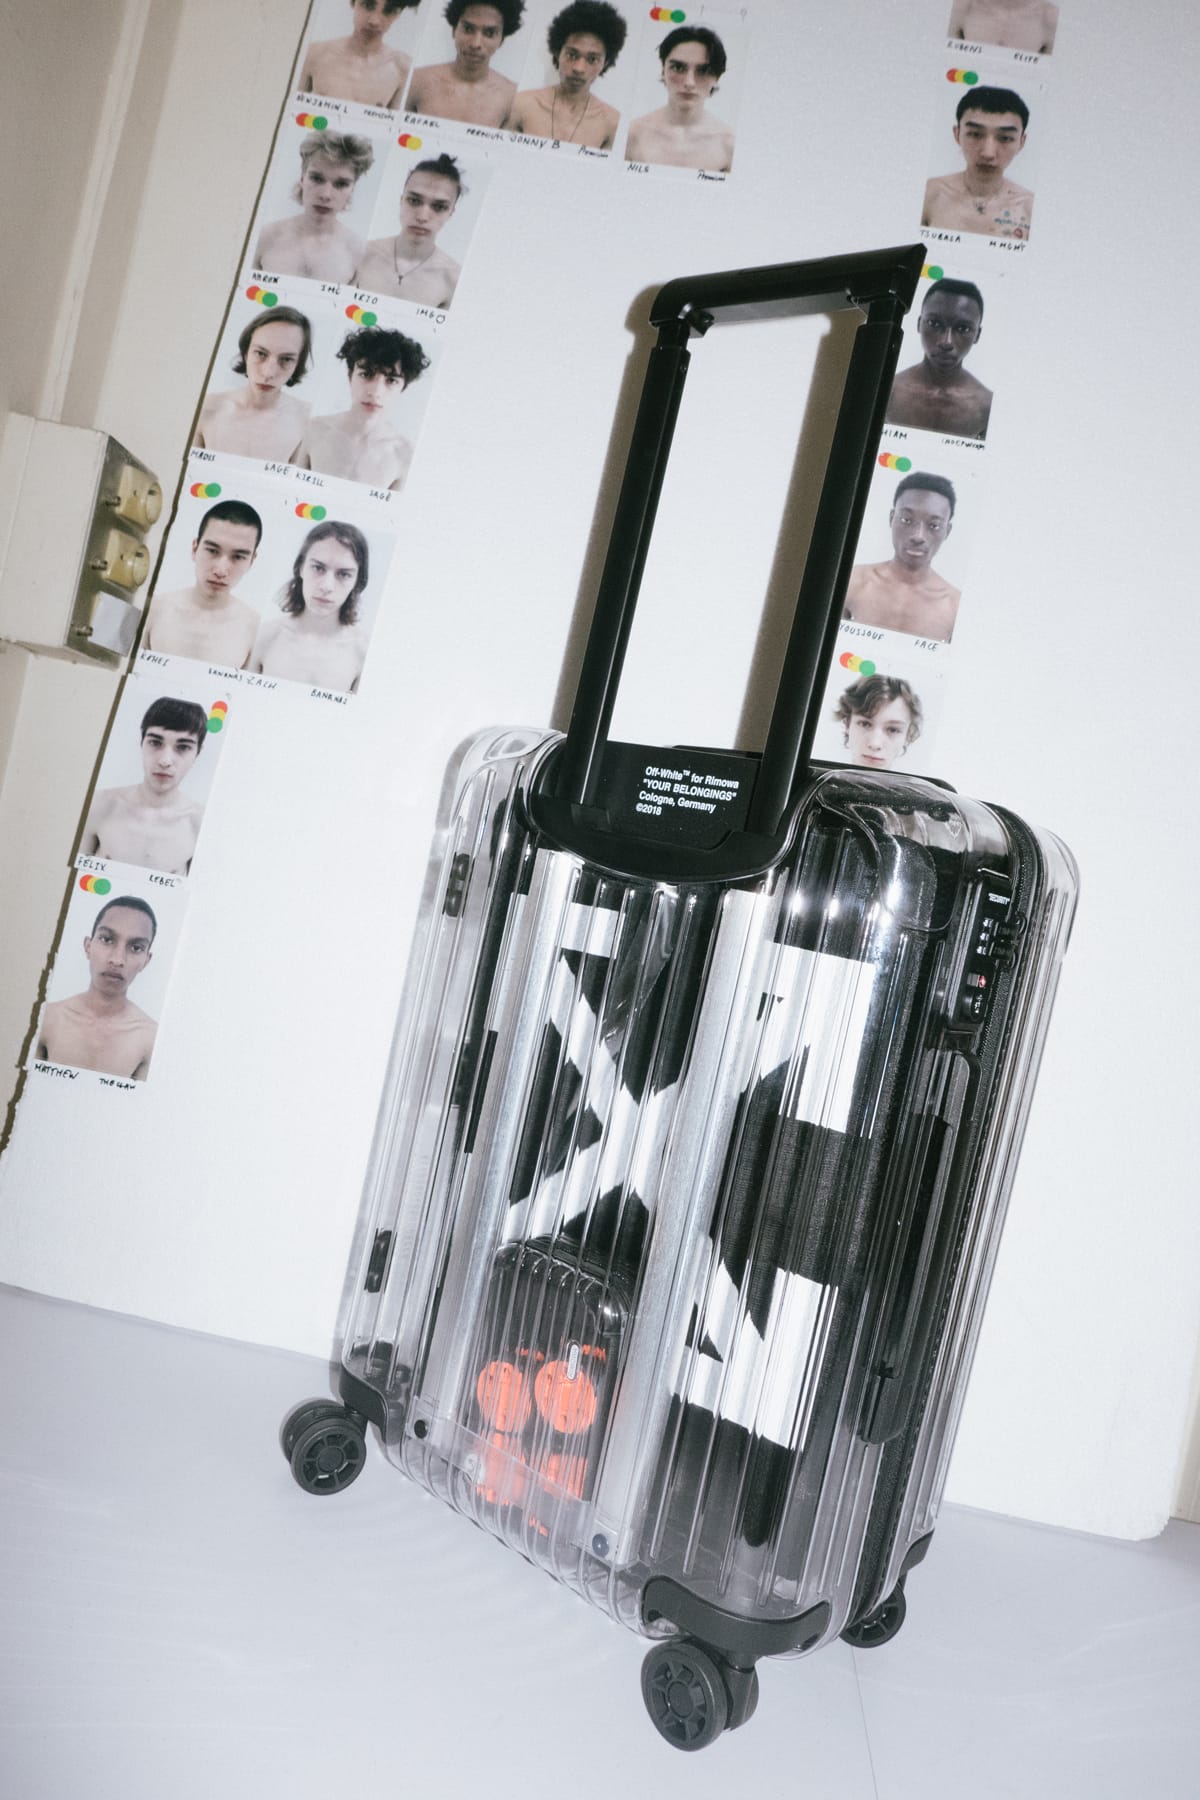 suitcase off white